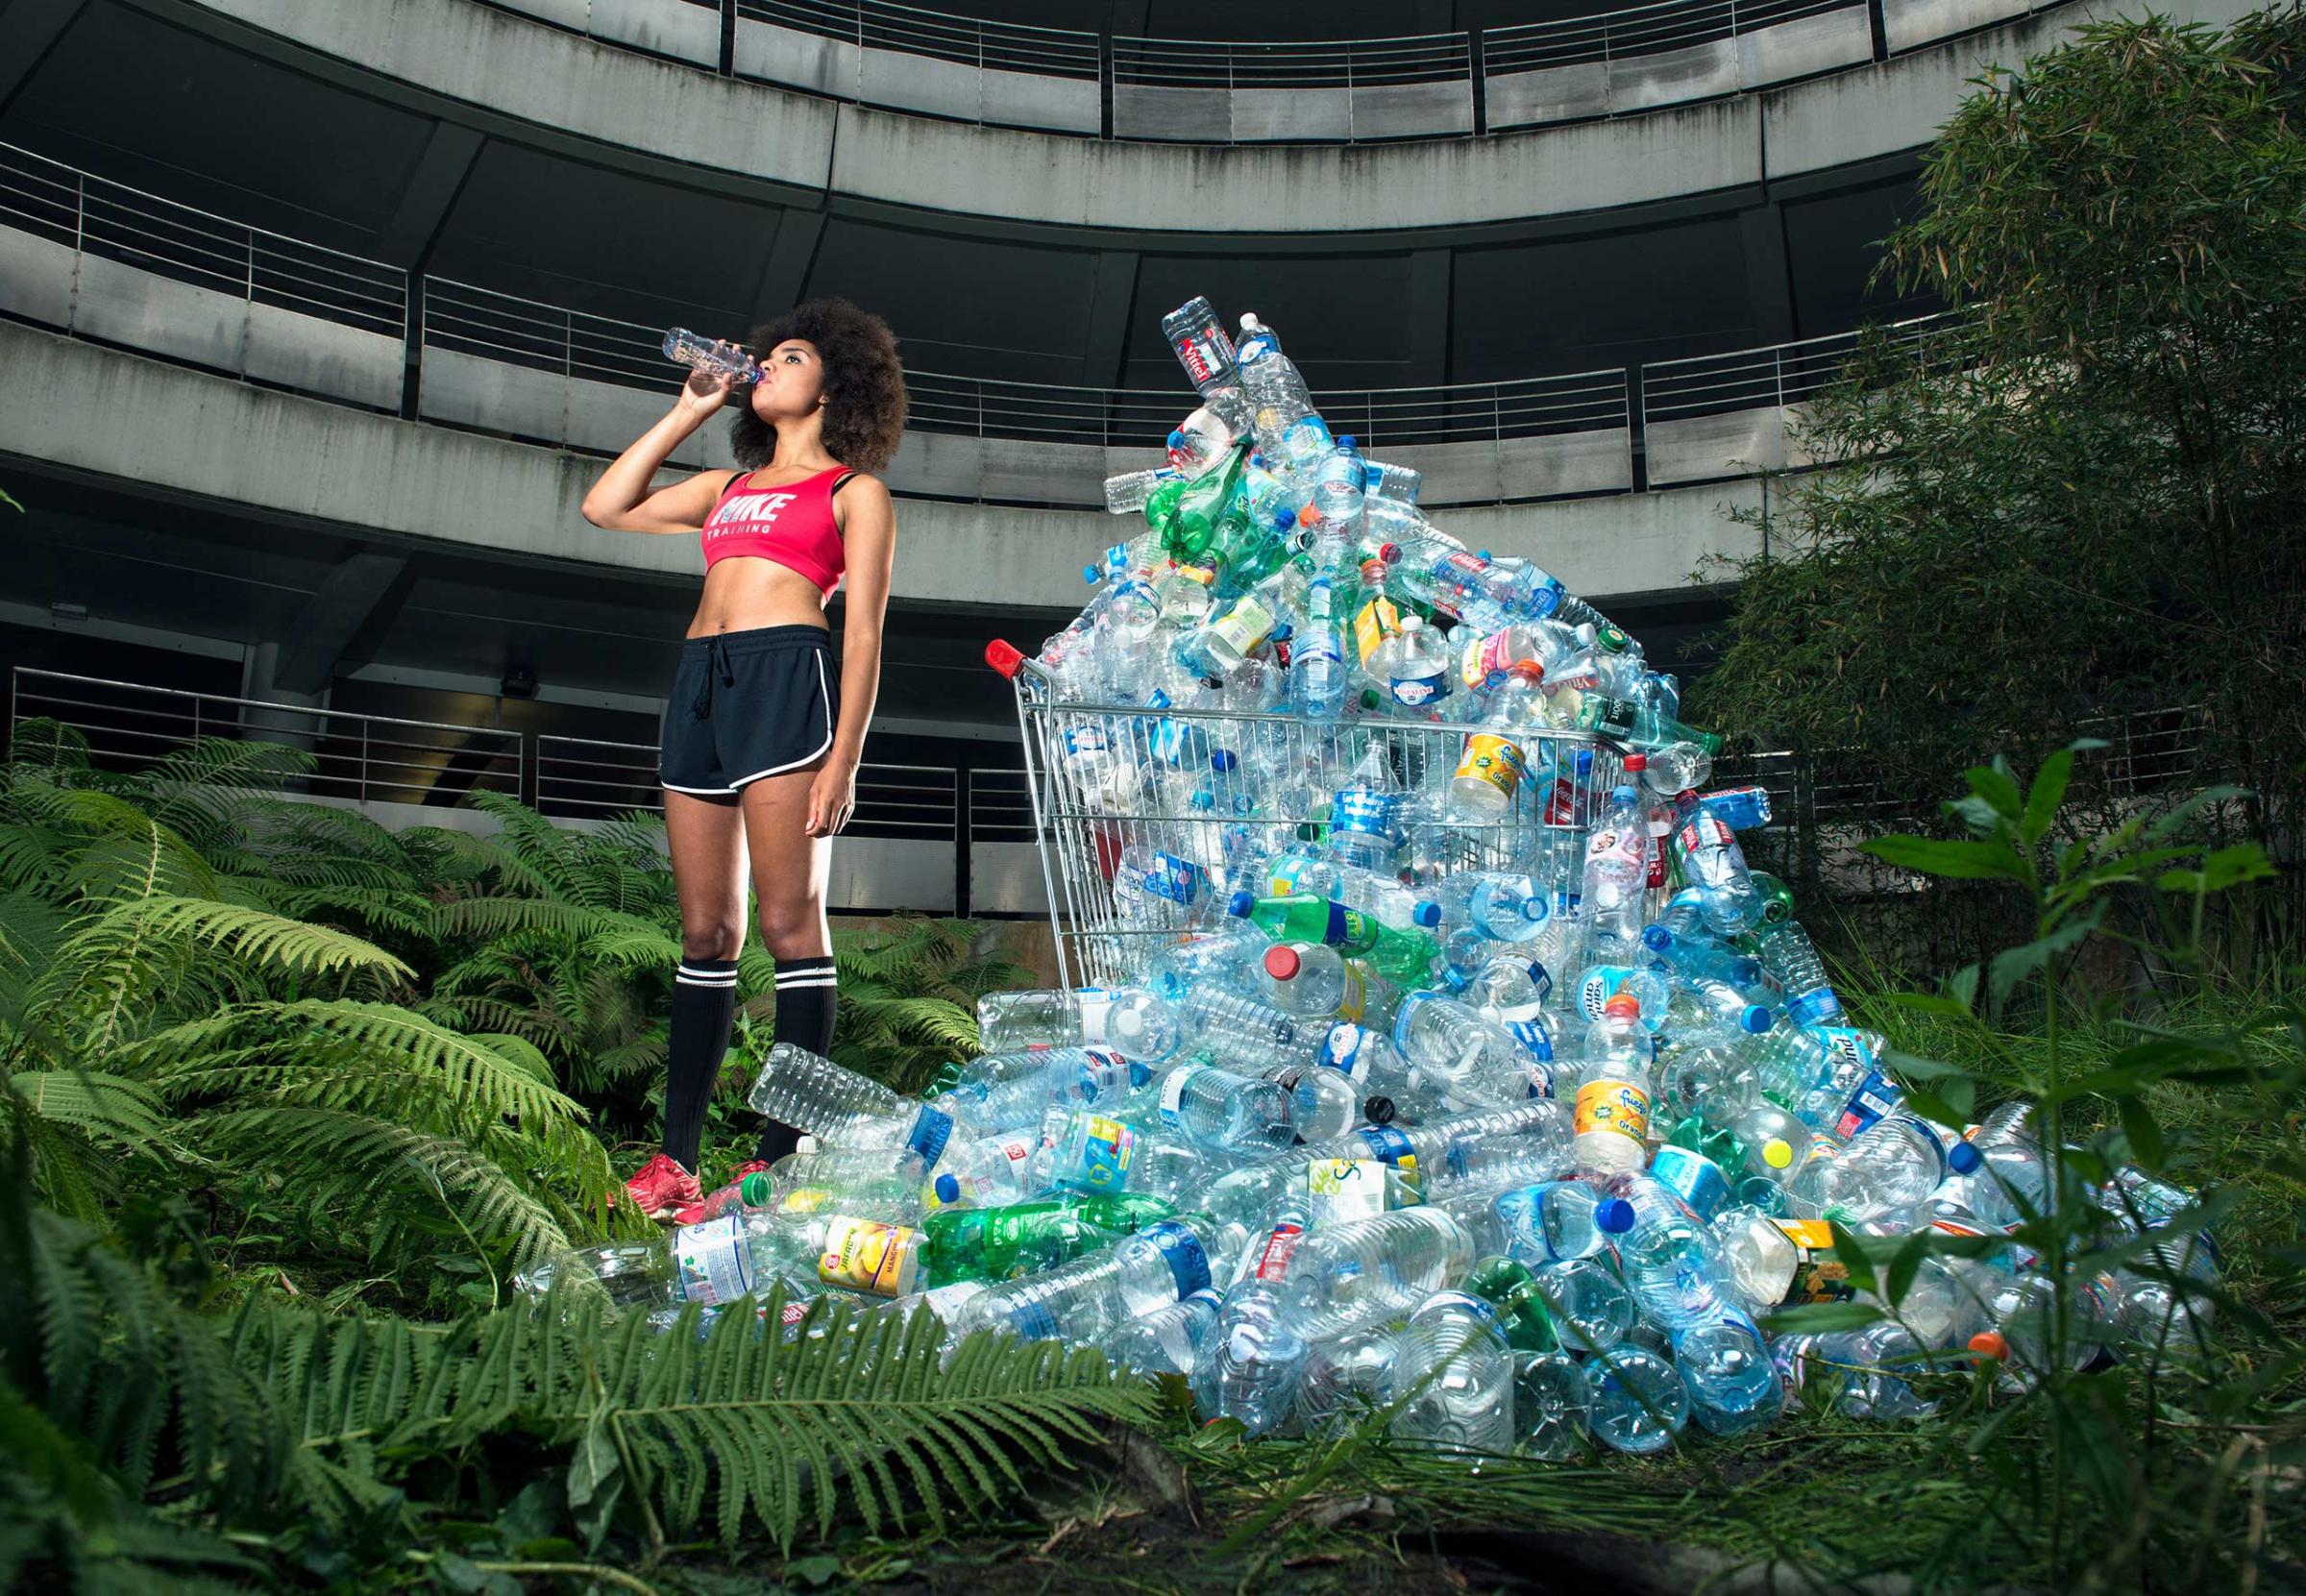 A woman drinks out of a water bottle near a "waste bank" of recycled waste in France. It's part of an exhibition exploring the excessive waste habits.